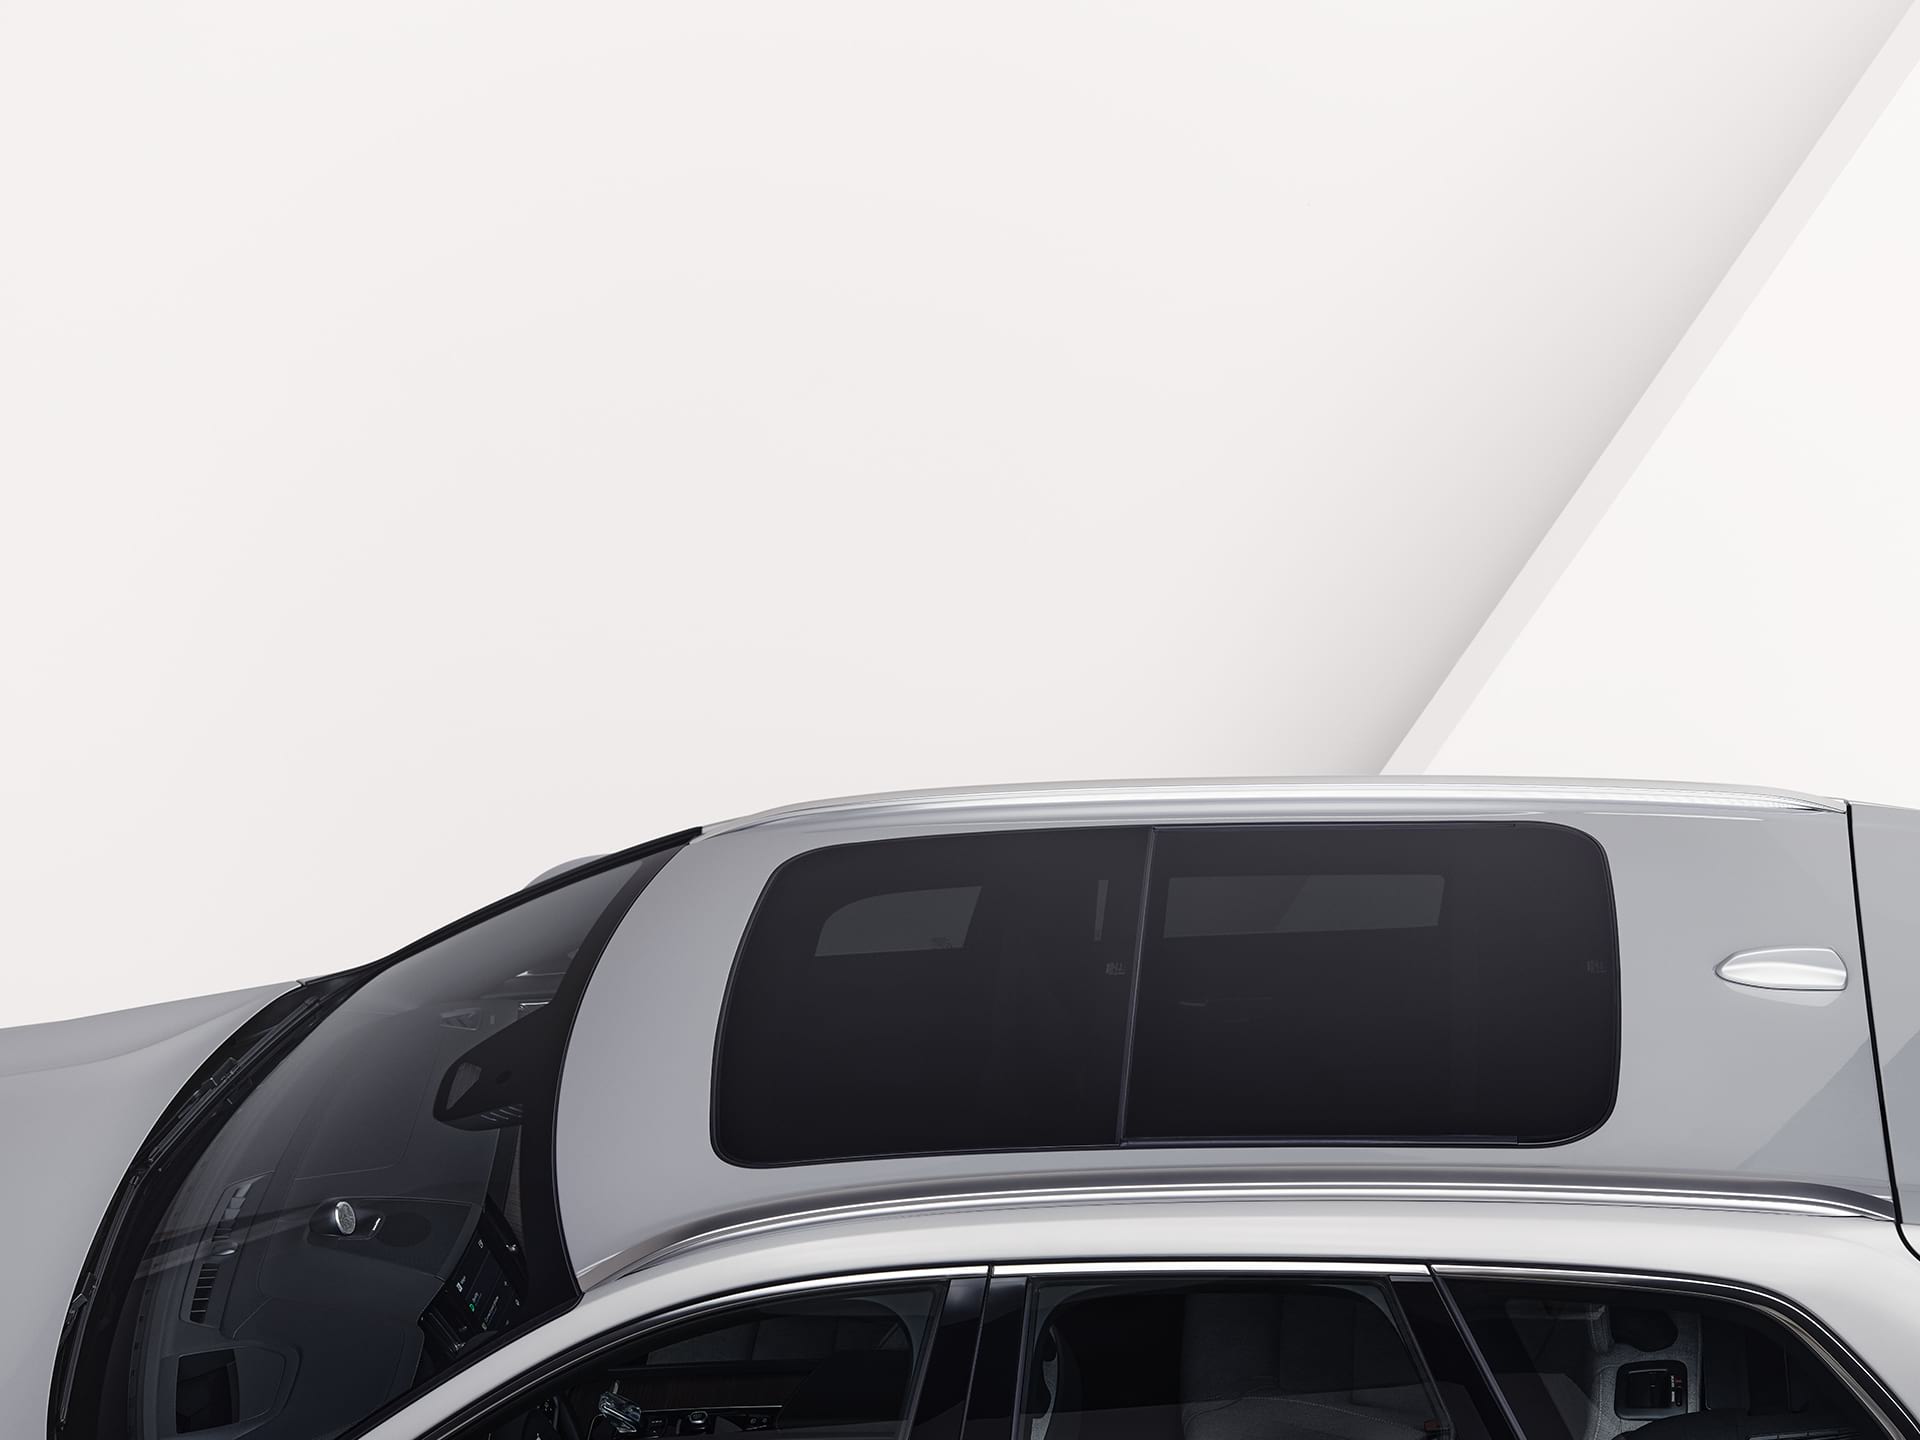 Exterior panoramic roof on a Volvo XC60.